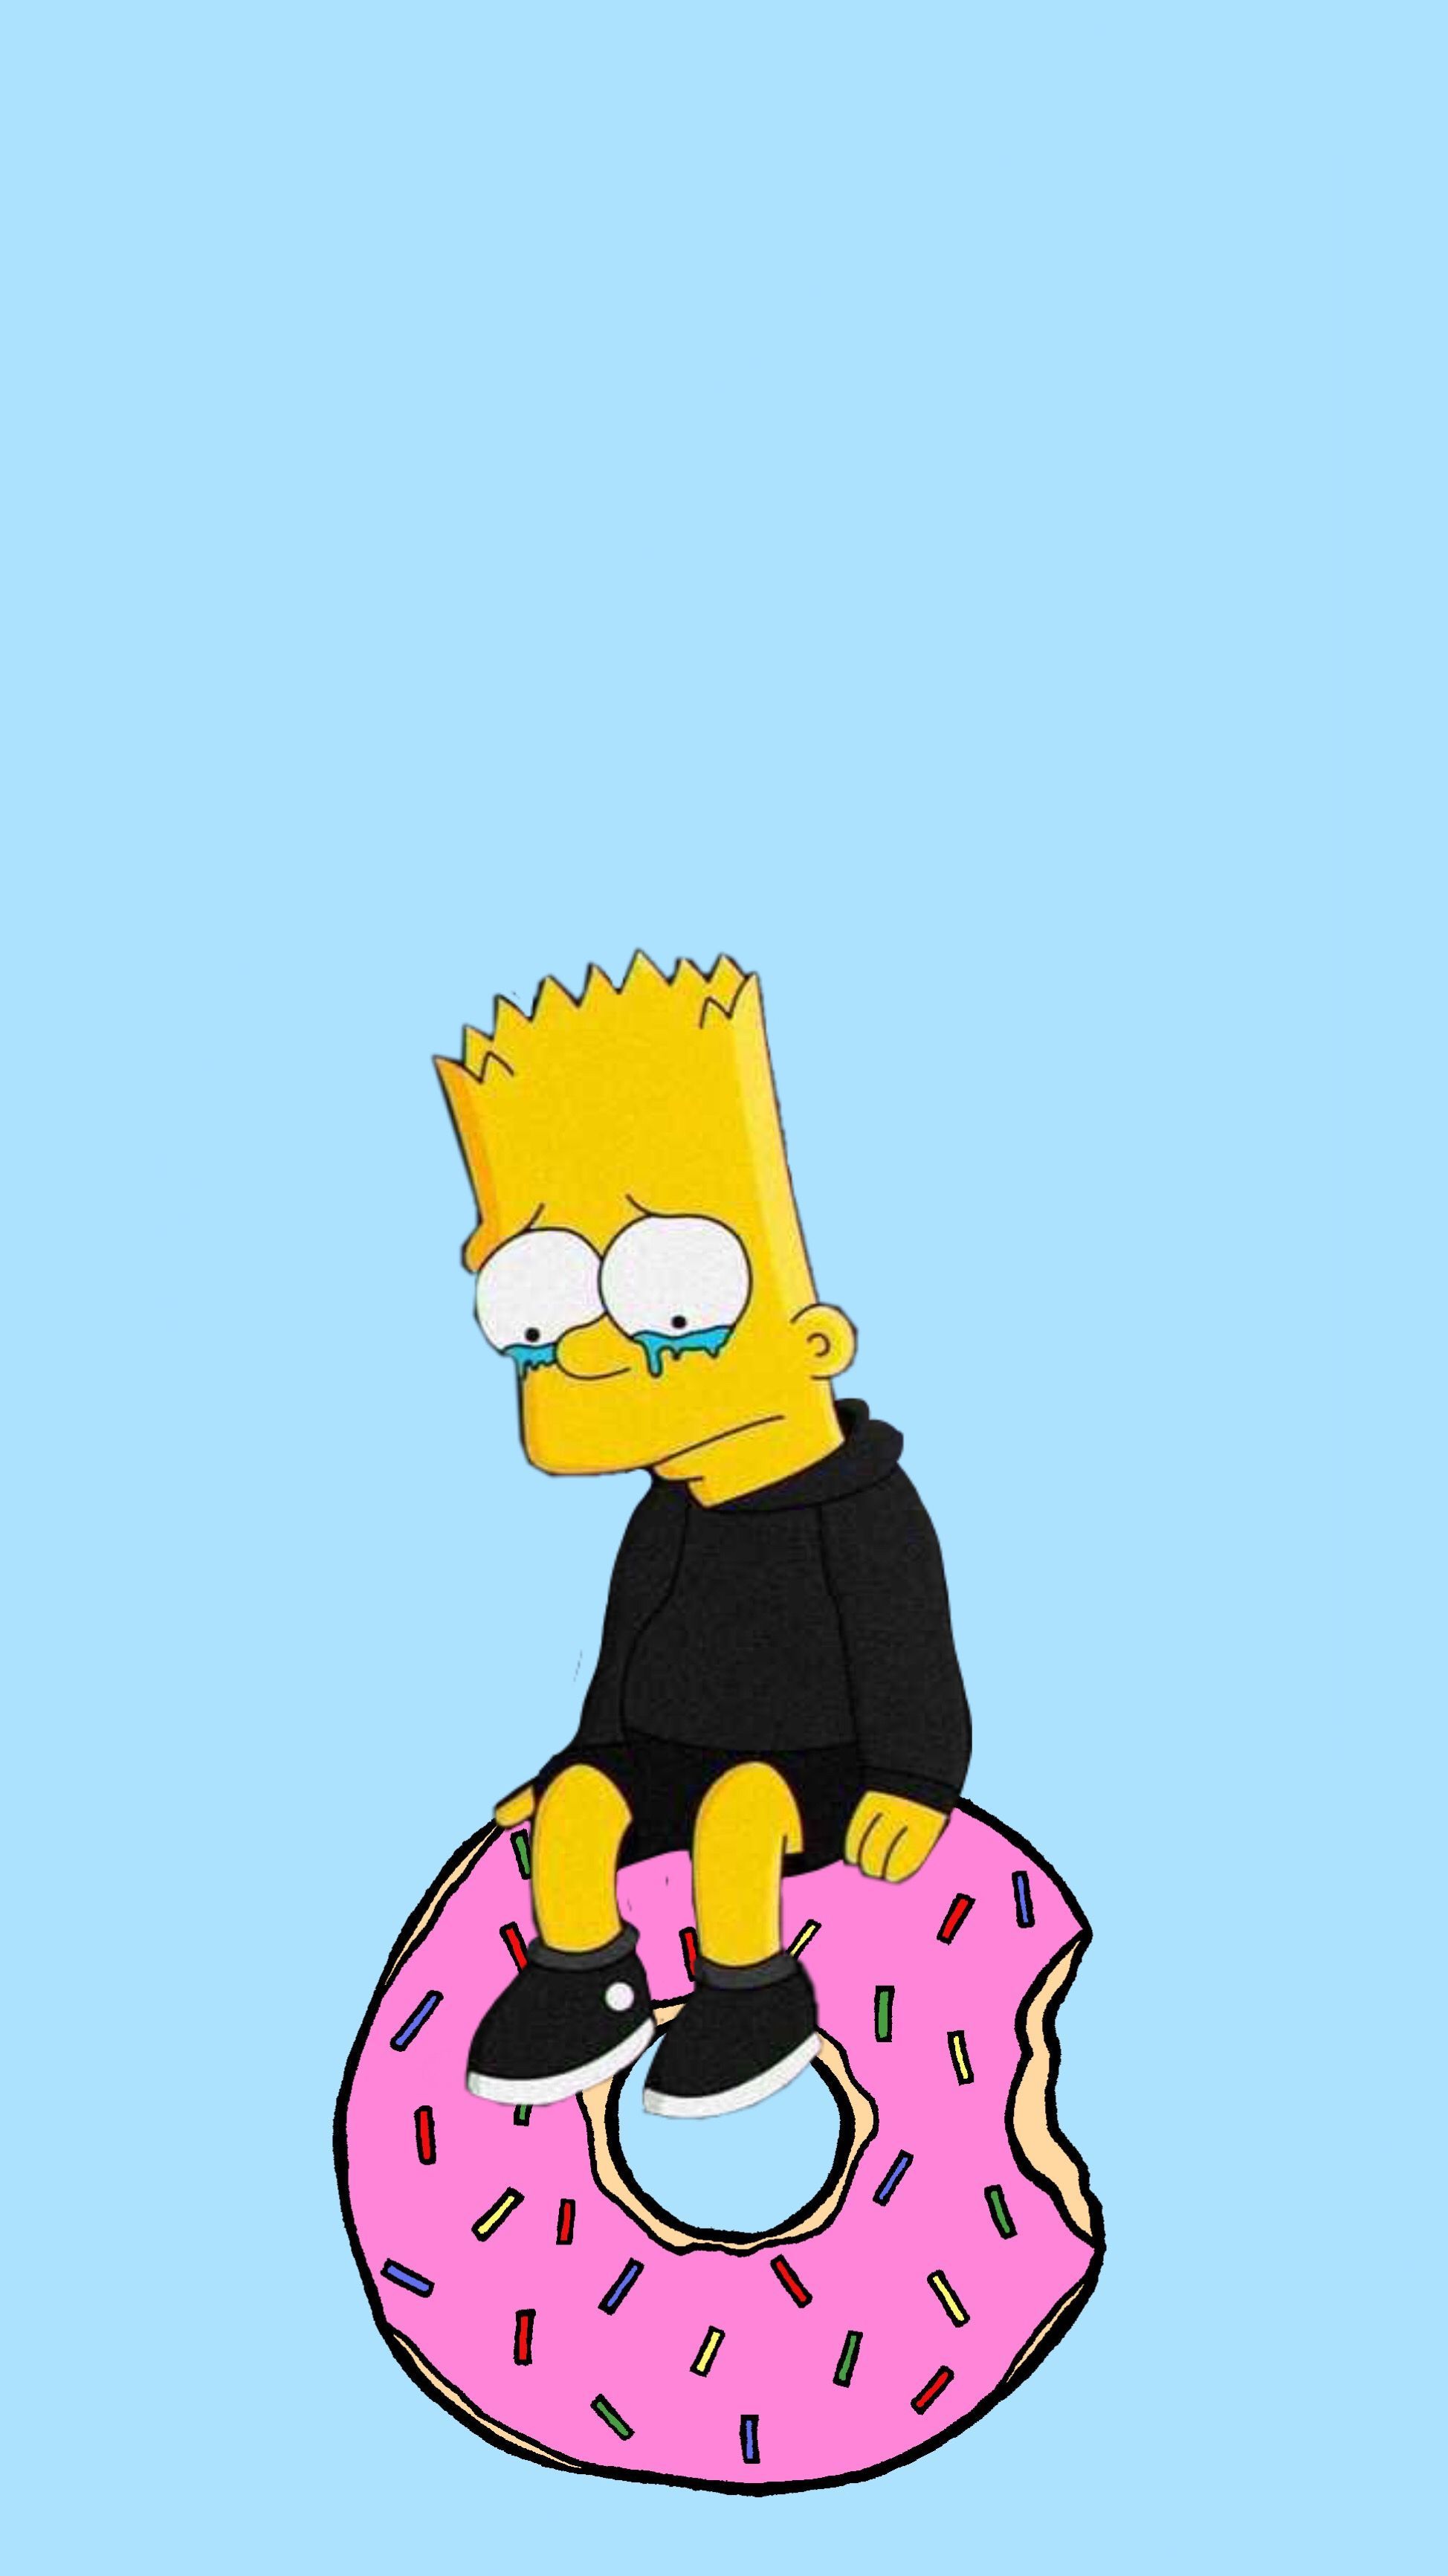 Bart Simpson sitting on a donut wallpaper - The Simpsons